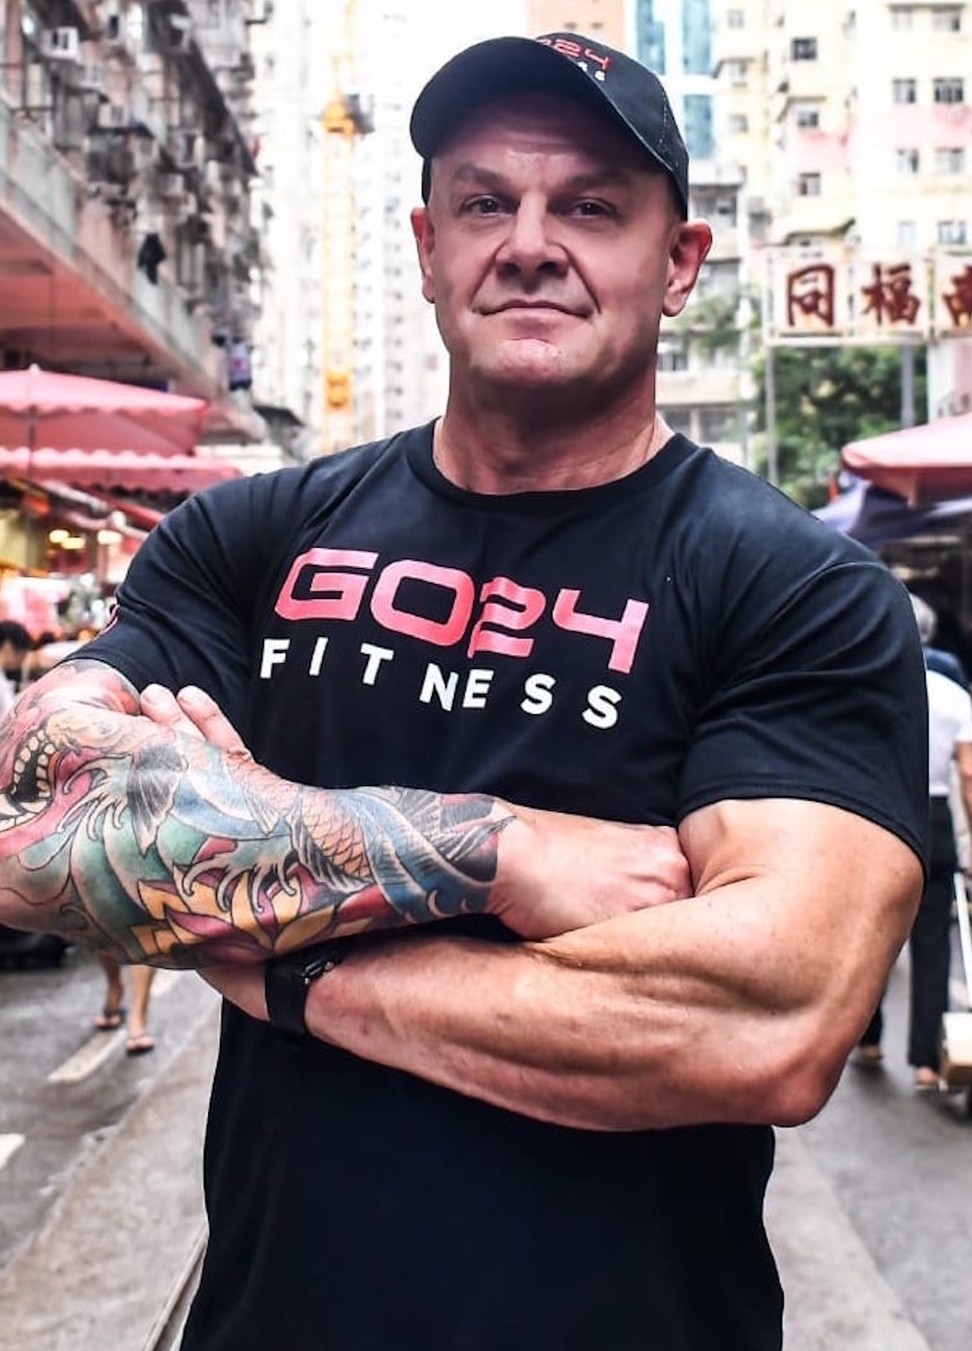 Australian Martin Barr is owner and operator of GO24 Fitness. Photo: Marty Barr